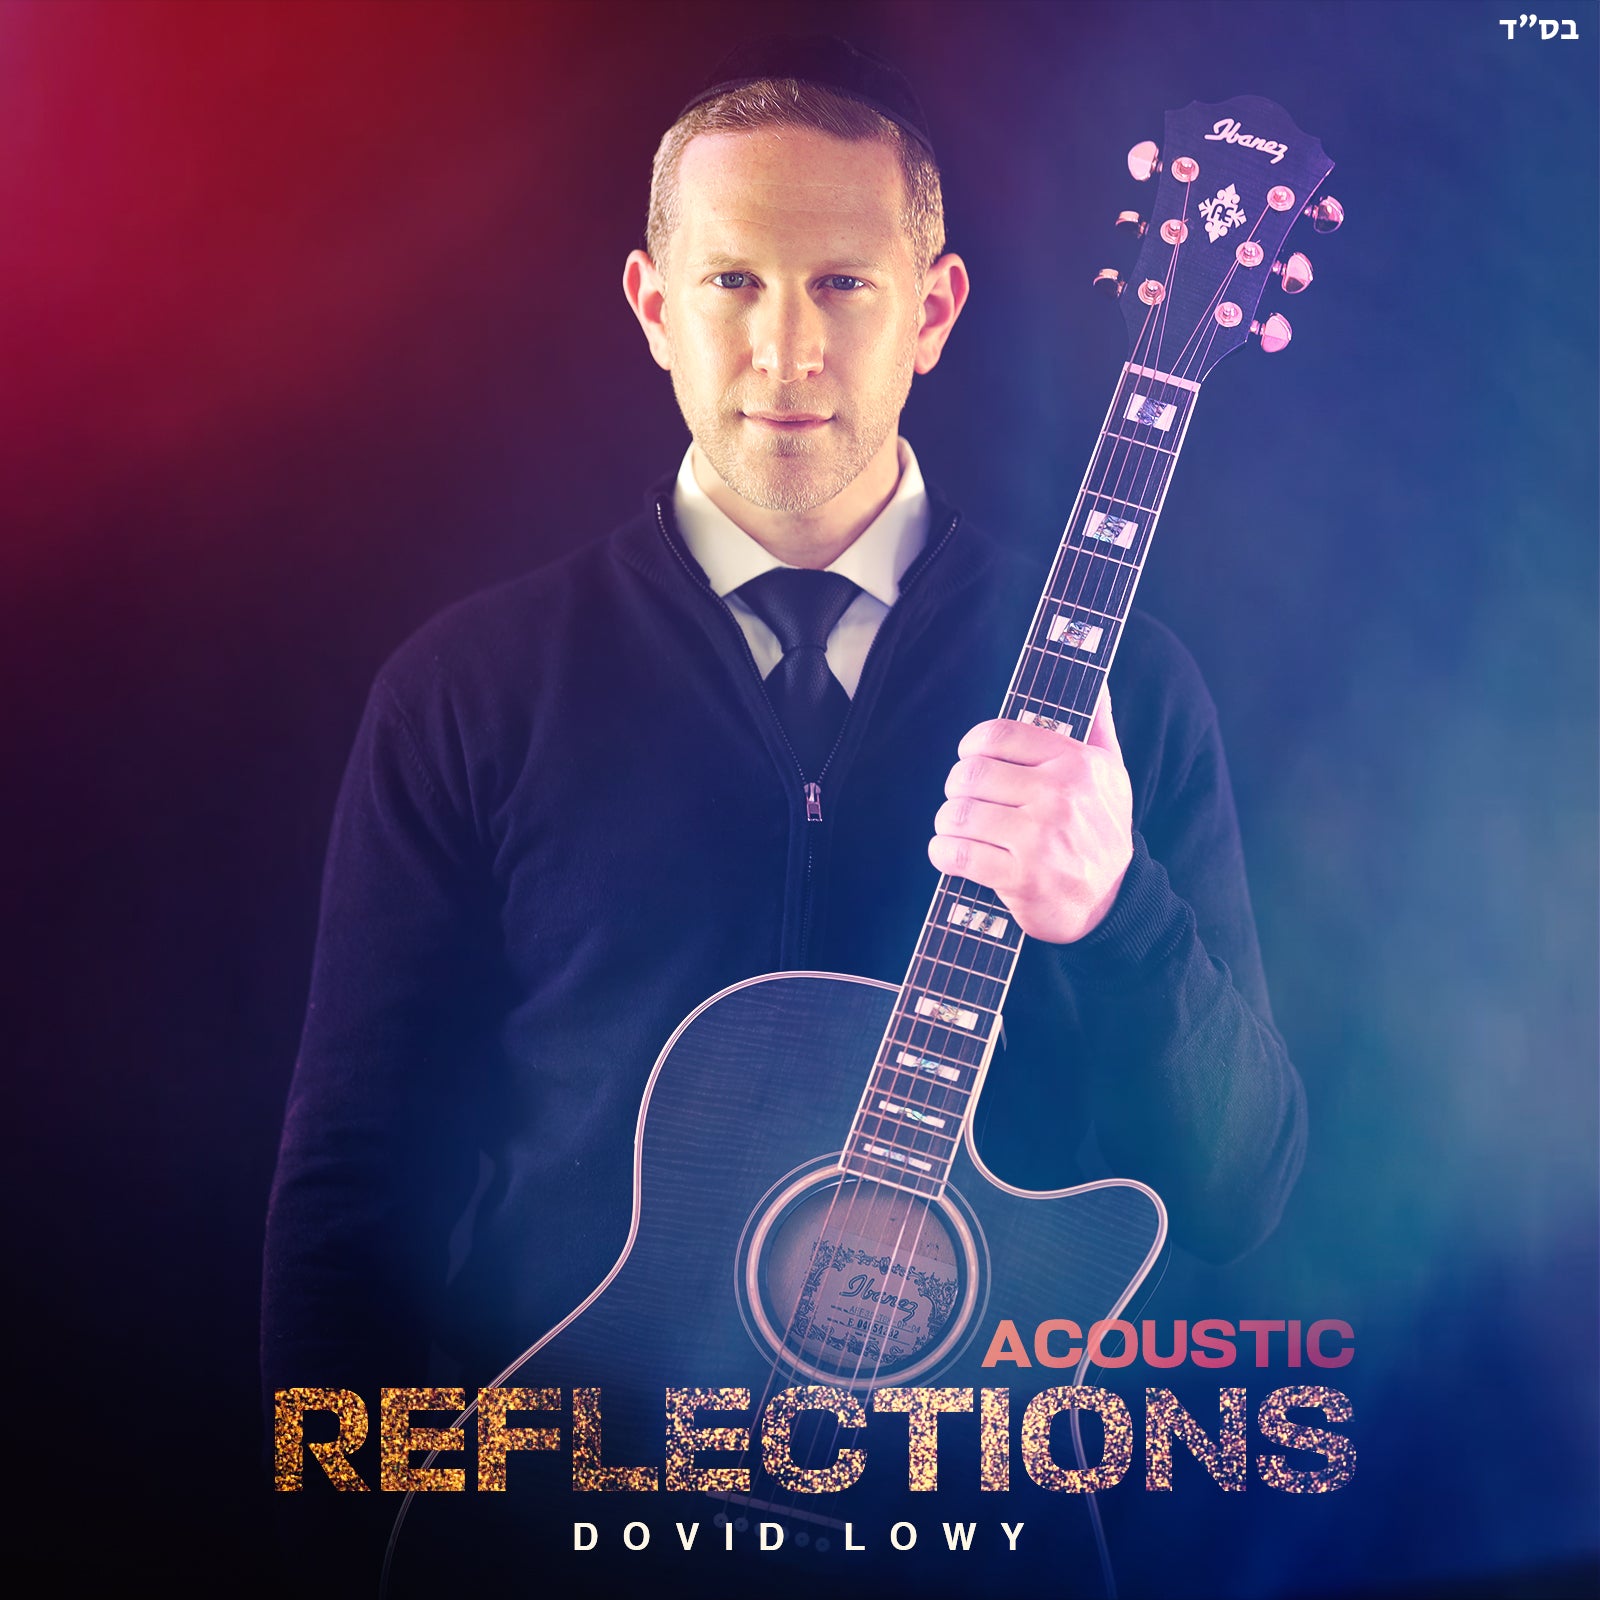 Dovid Lowy - Acoustic Reflections